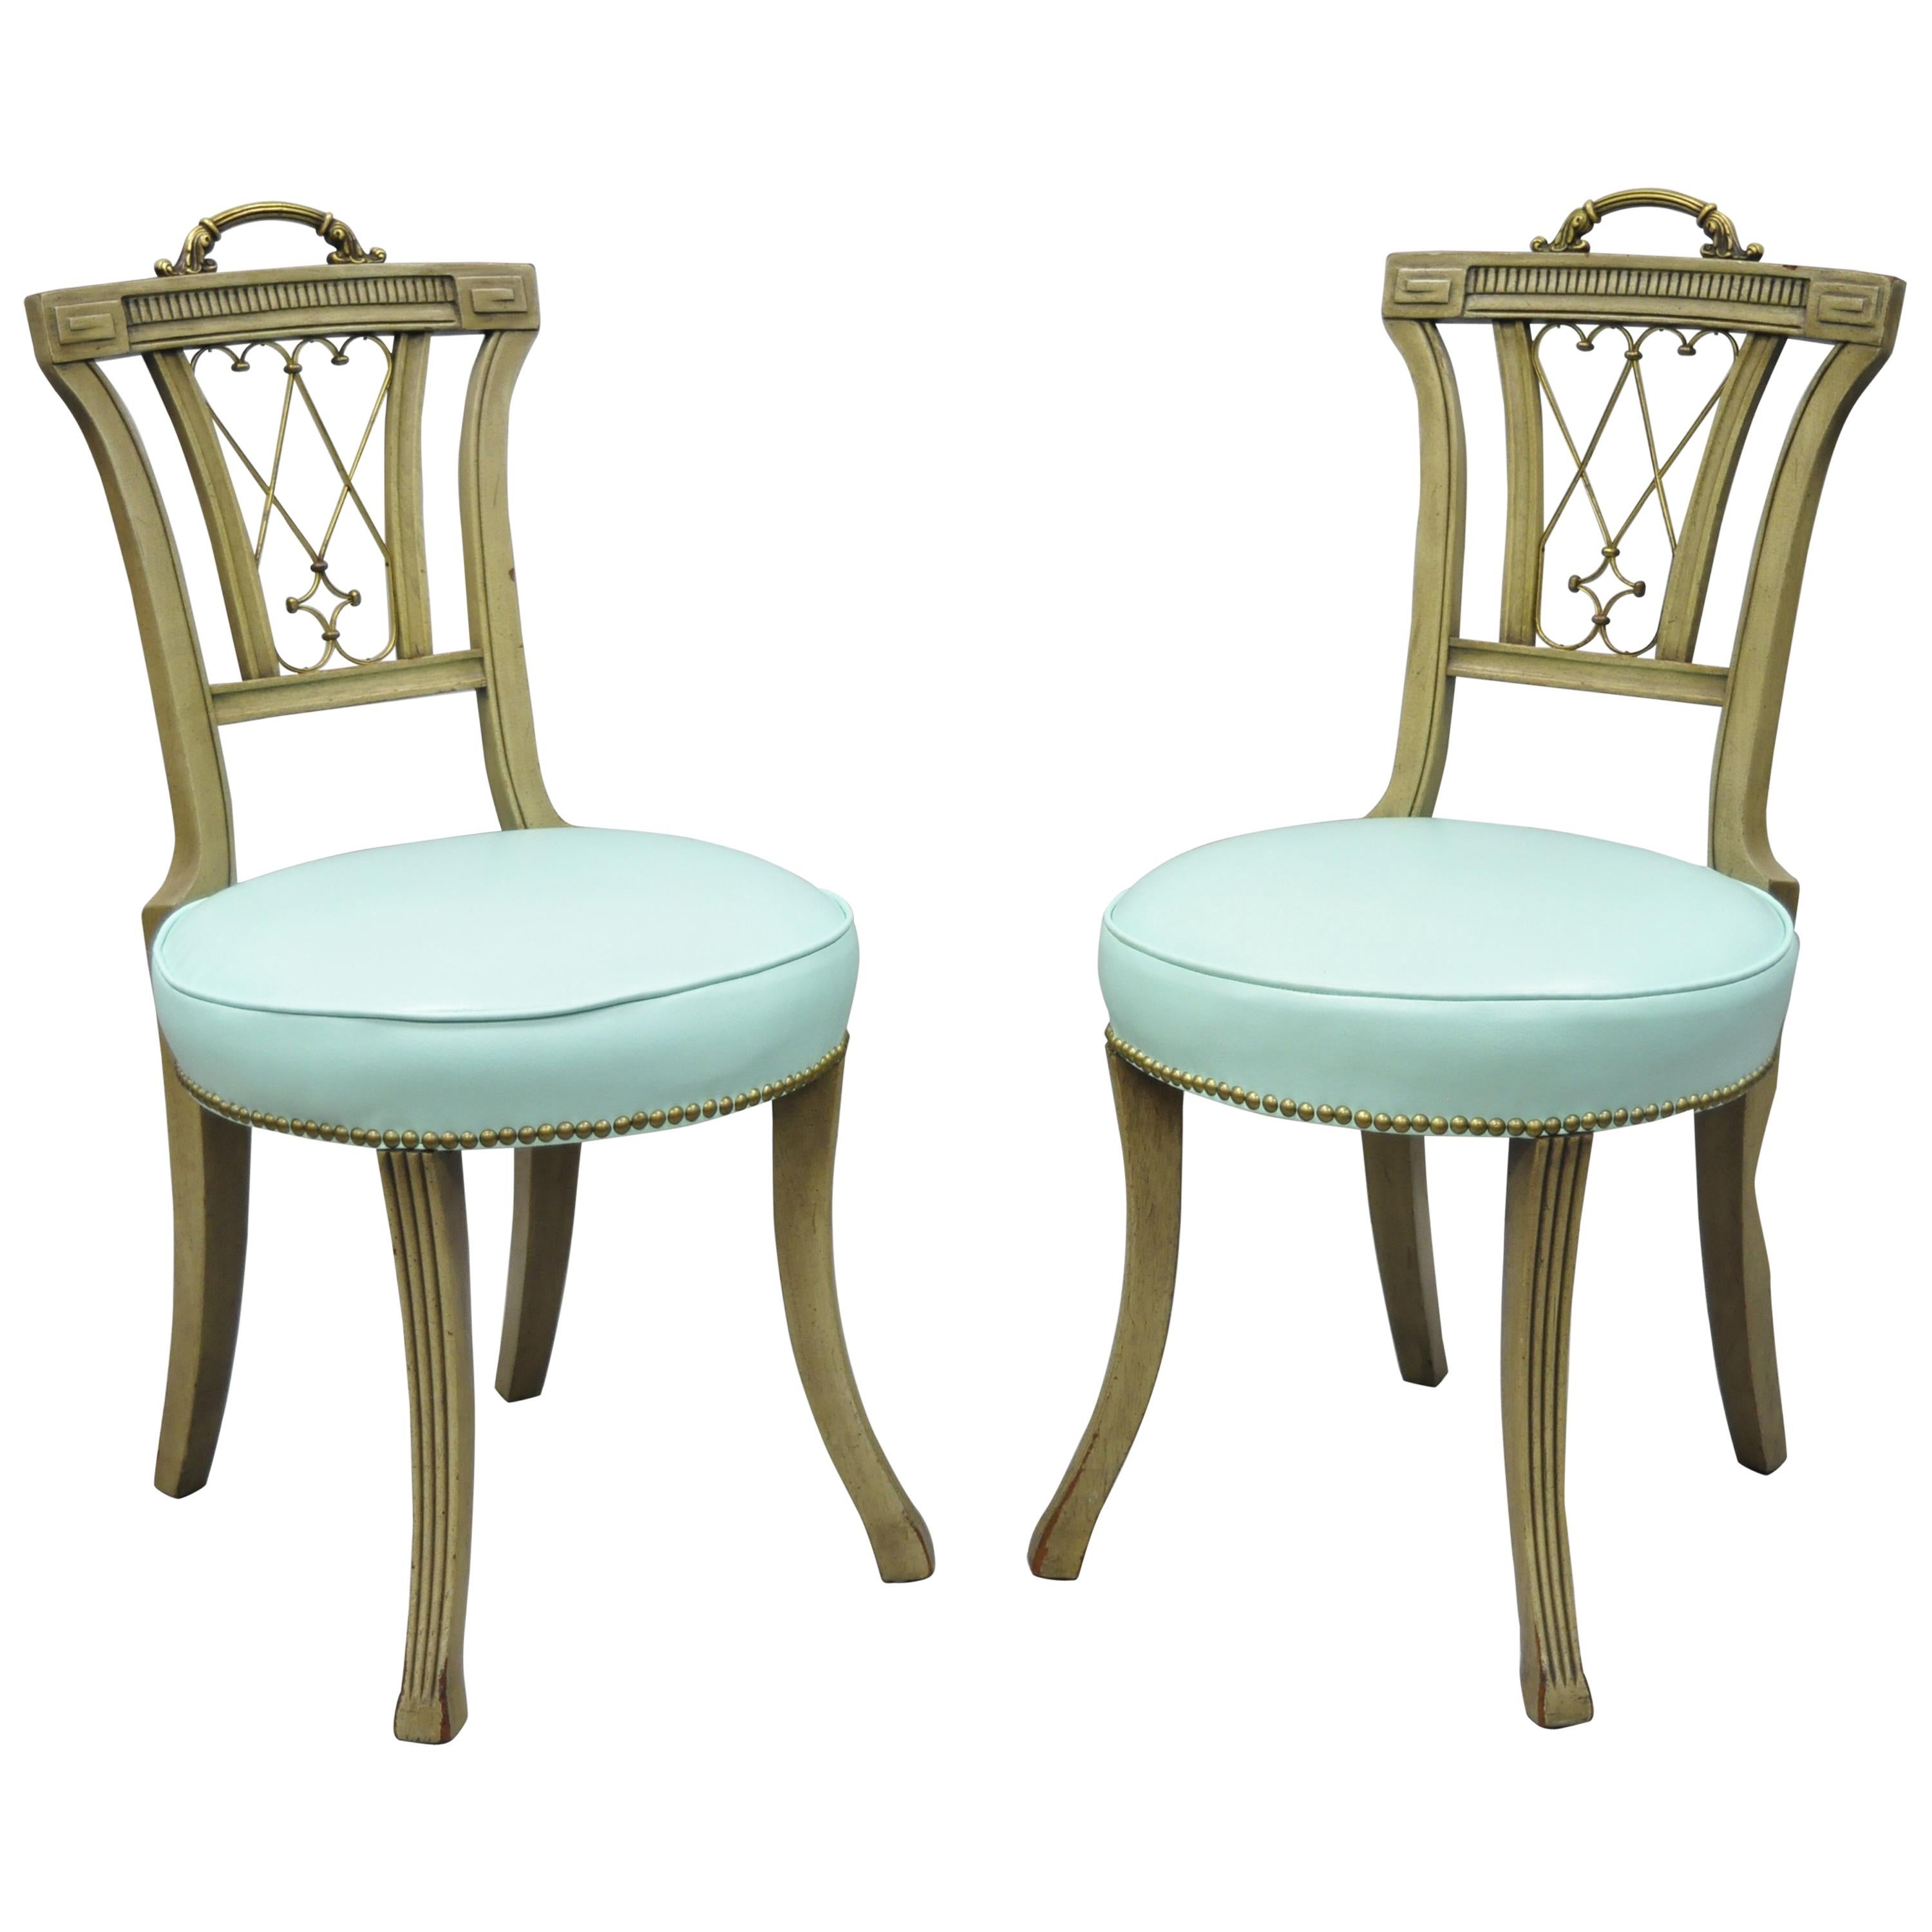 Carved Mahogany French Regency Style Chairs with Brass Handle & Aqua Vinyl, Pair